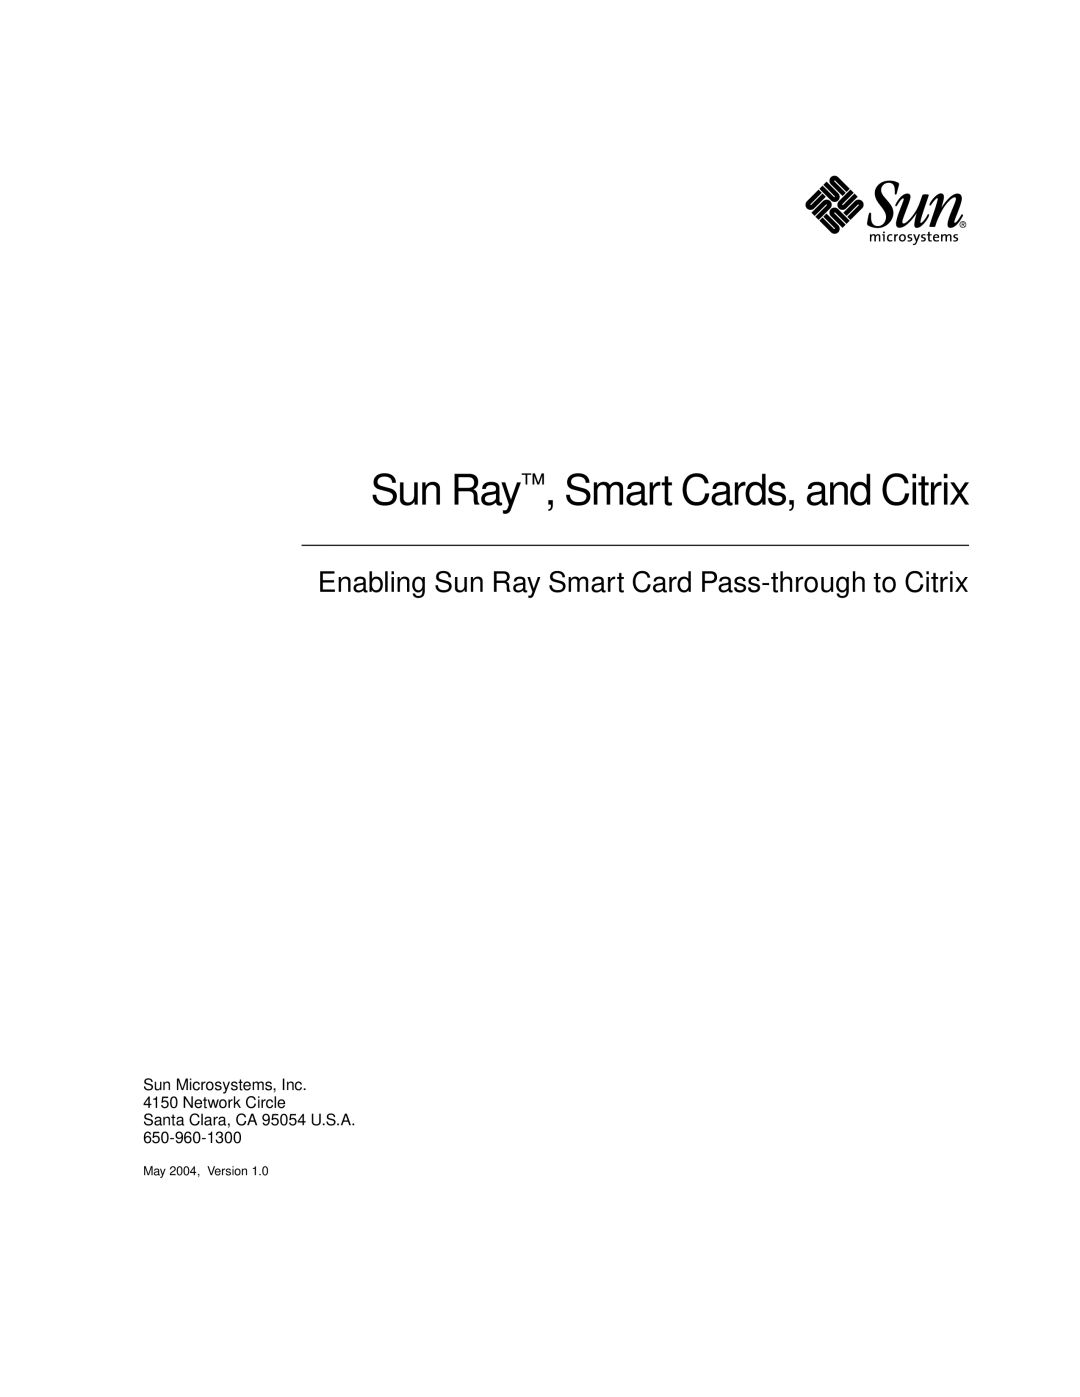 Sun Microsystems manual Sun Ray , Smart Cards, and Citrix, Enabling Sun Ray Smart Card Pass-through to Citrix 